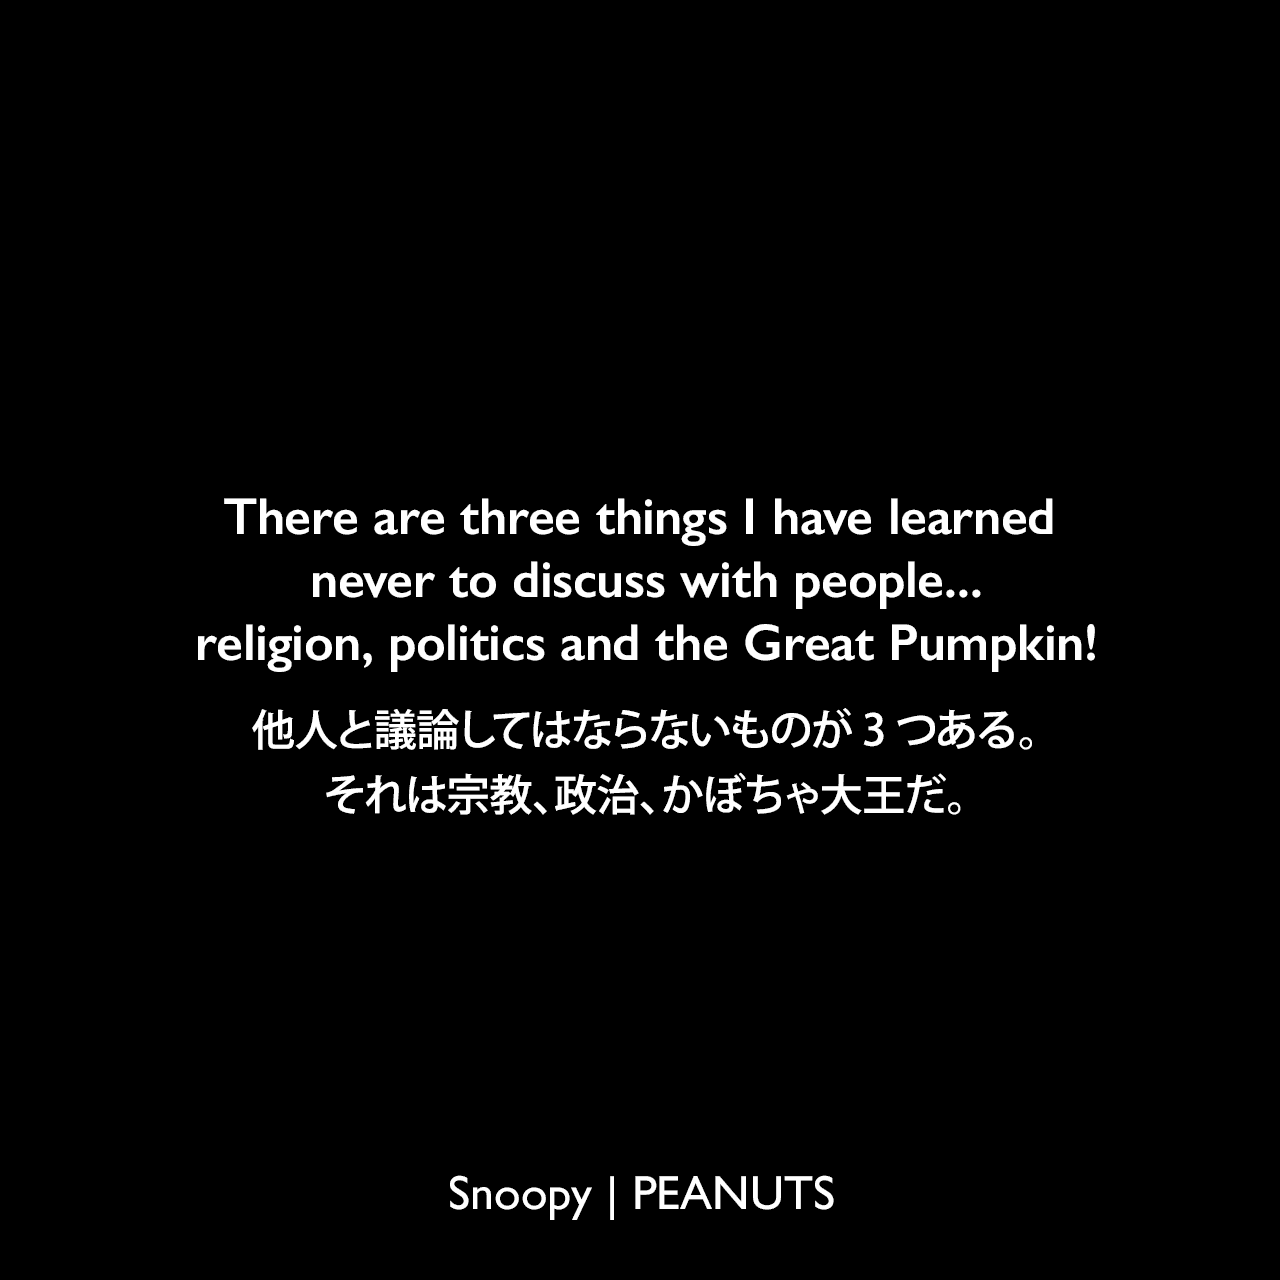 There are three things I have learned never to discuss with people...religion, politics and the Great Pumpkin!他人と議論してはならないものが3つある。それは宗教、政治、かぼちゃ大王だ。- ライナス (1961年10月25日のコミック)Charles Monroe Schulz